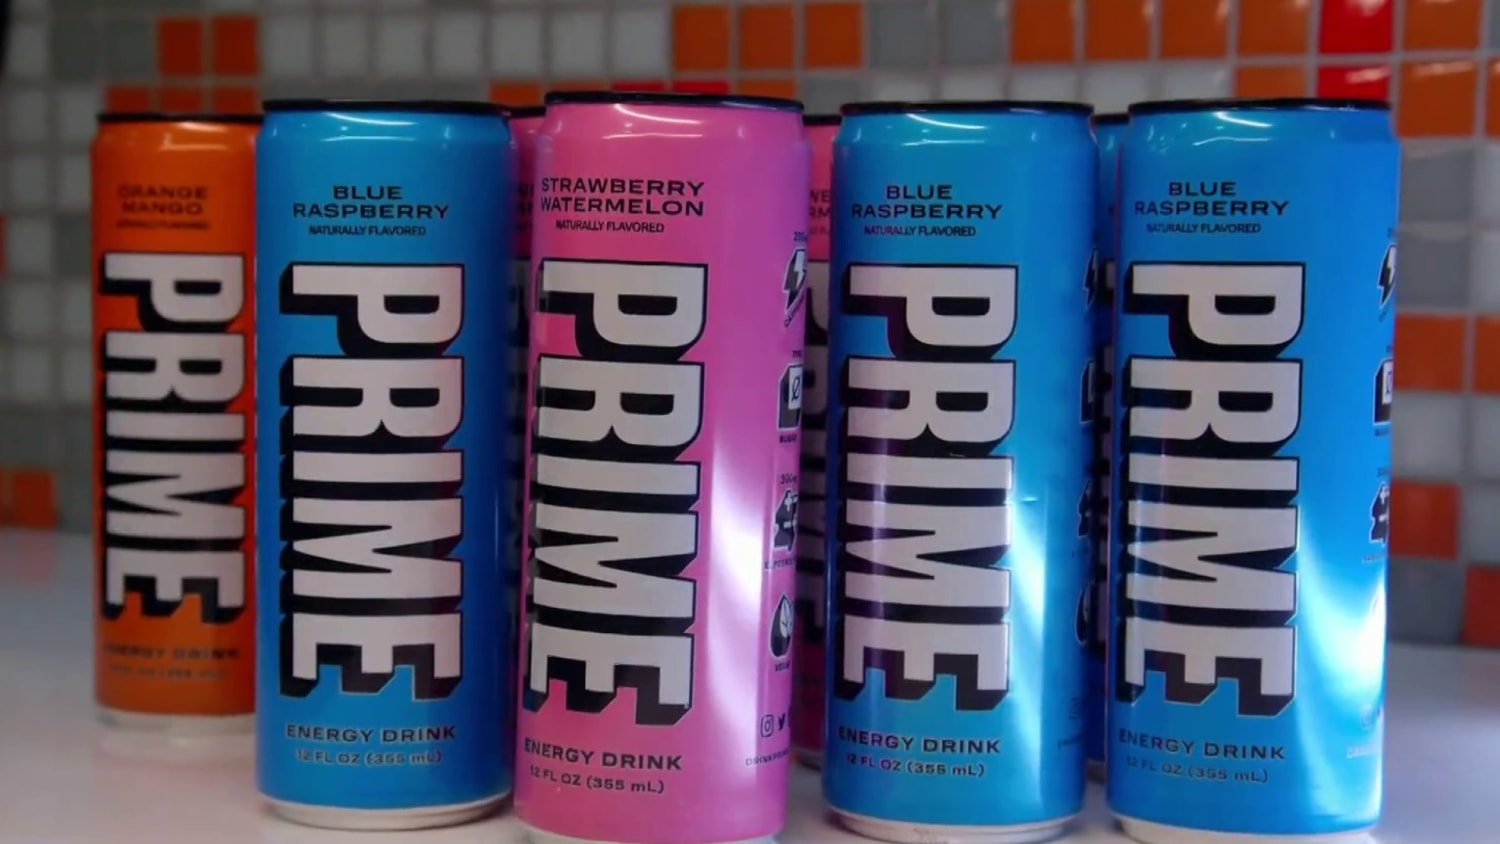 Who actually owns Prime energy drinks?